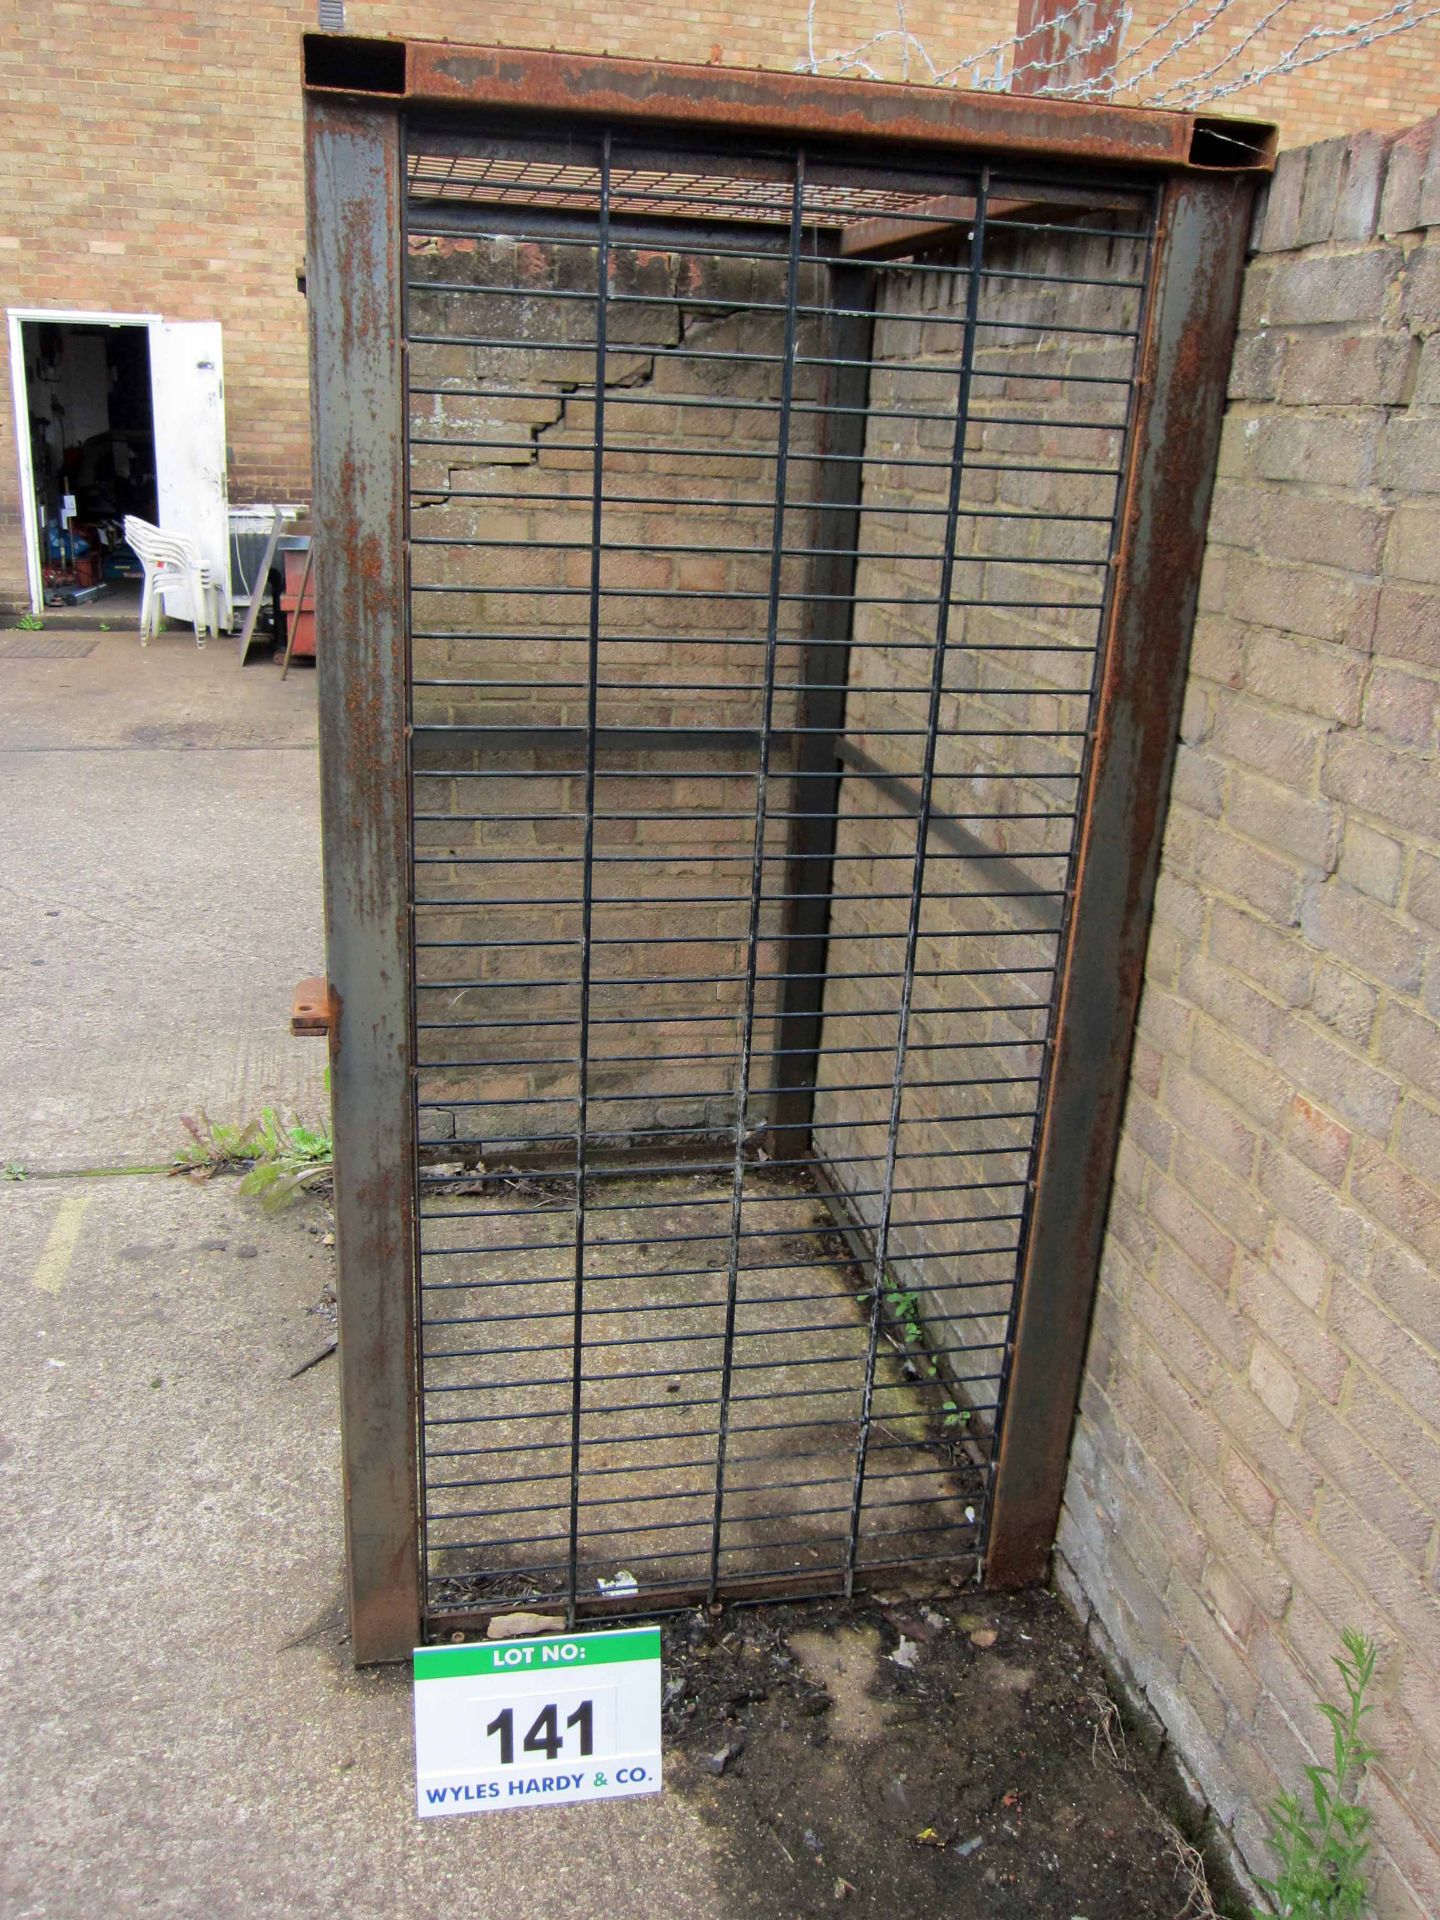 A 1420mm x 1000mm x 1920mm Lockable Gas 2-Sided Mesh Cage with Full Height Door (Excludes Padlock) - Image 2 of 2